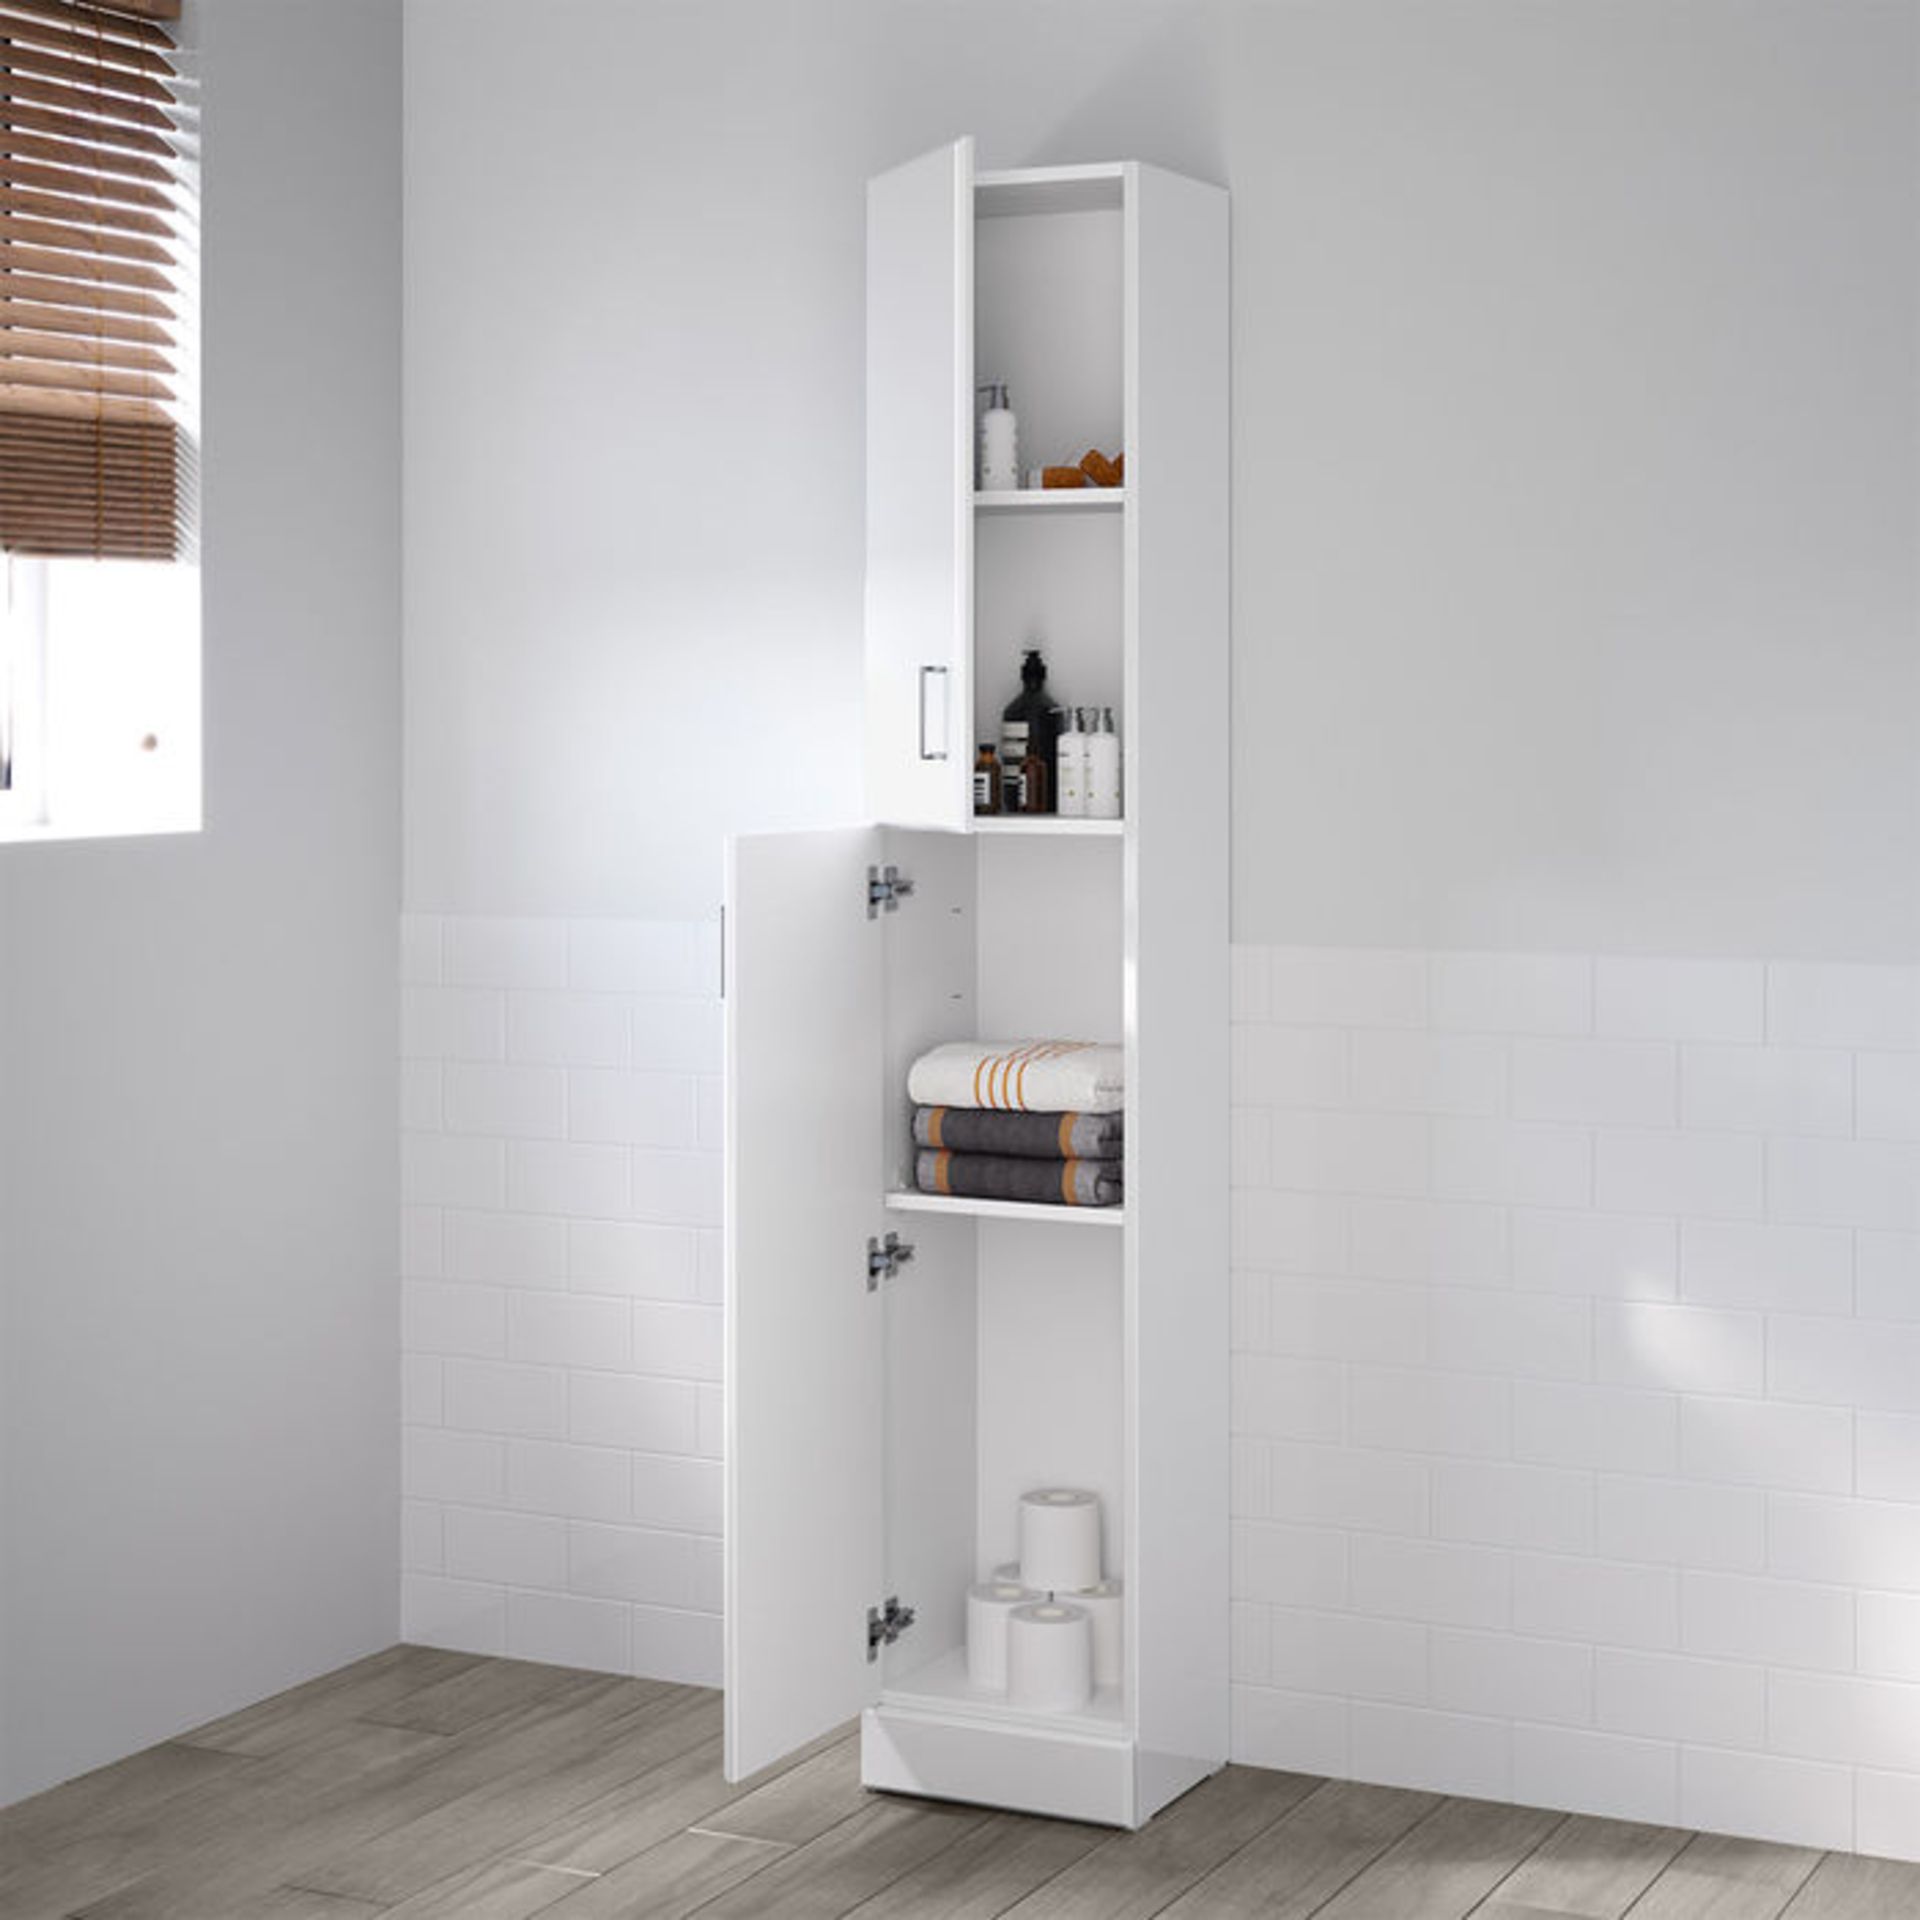 (OS69) 1900x300mm Quartz Gloss White Tall Storage Cabinet - Floor Standing. RRP £299.99. Pristine - Image 2 of 5